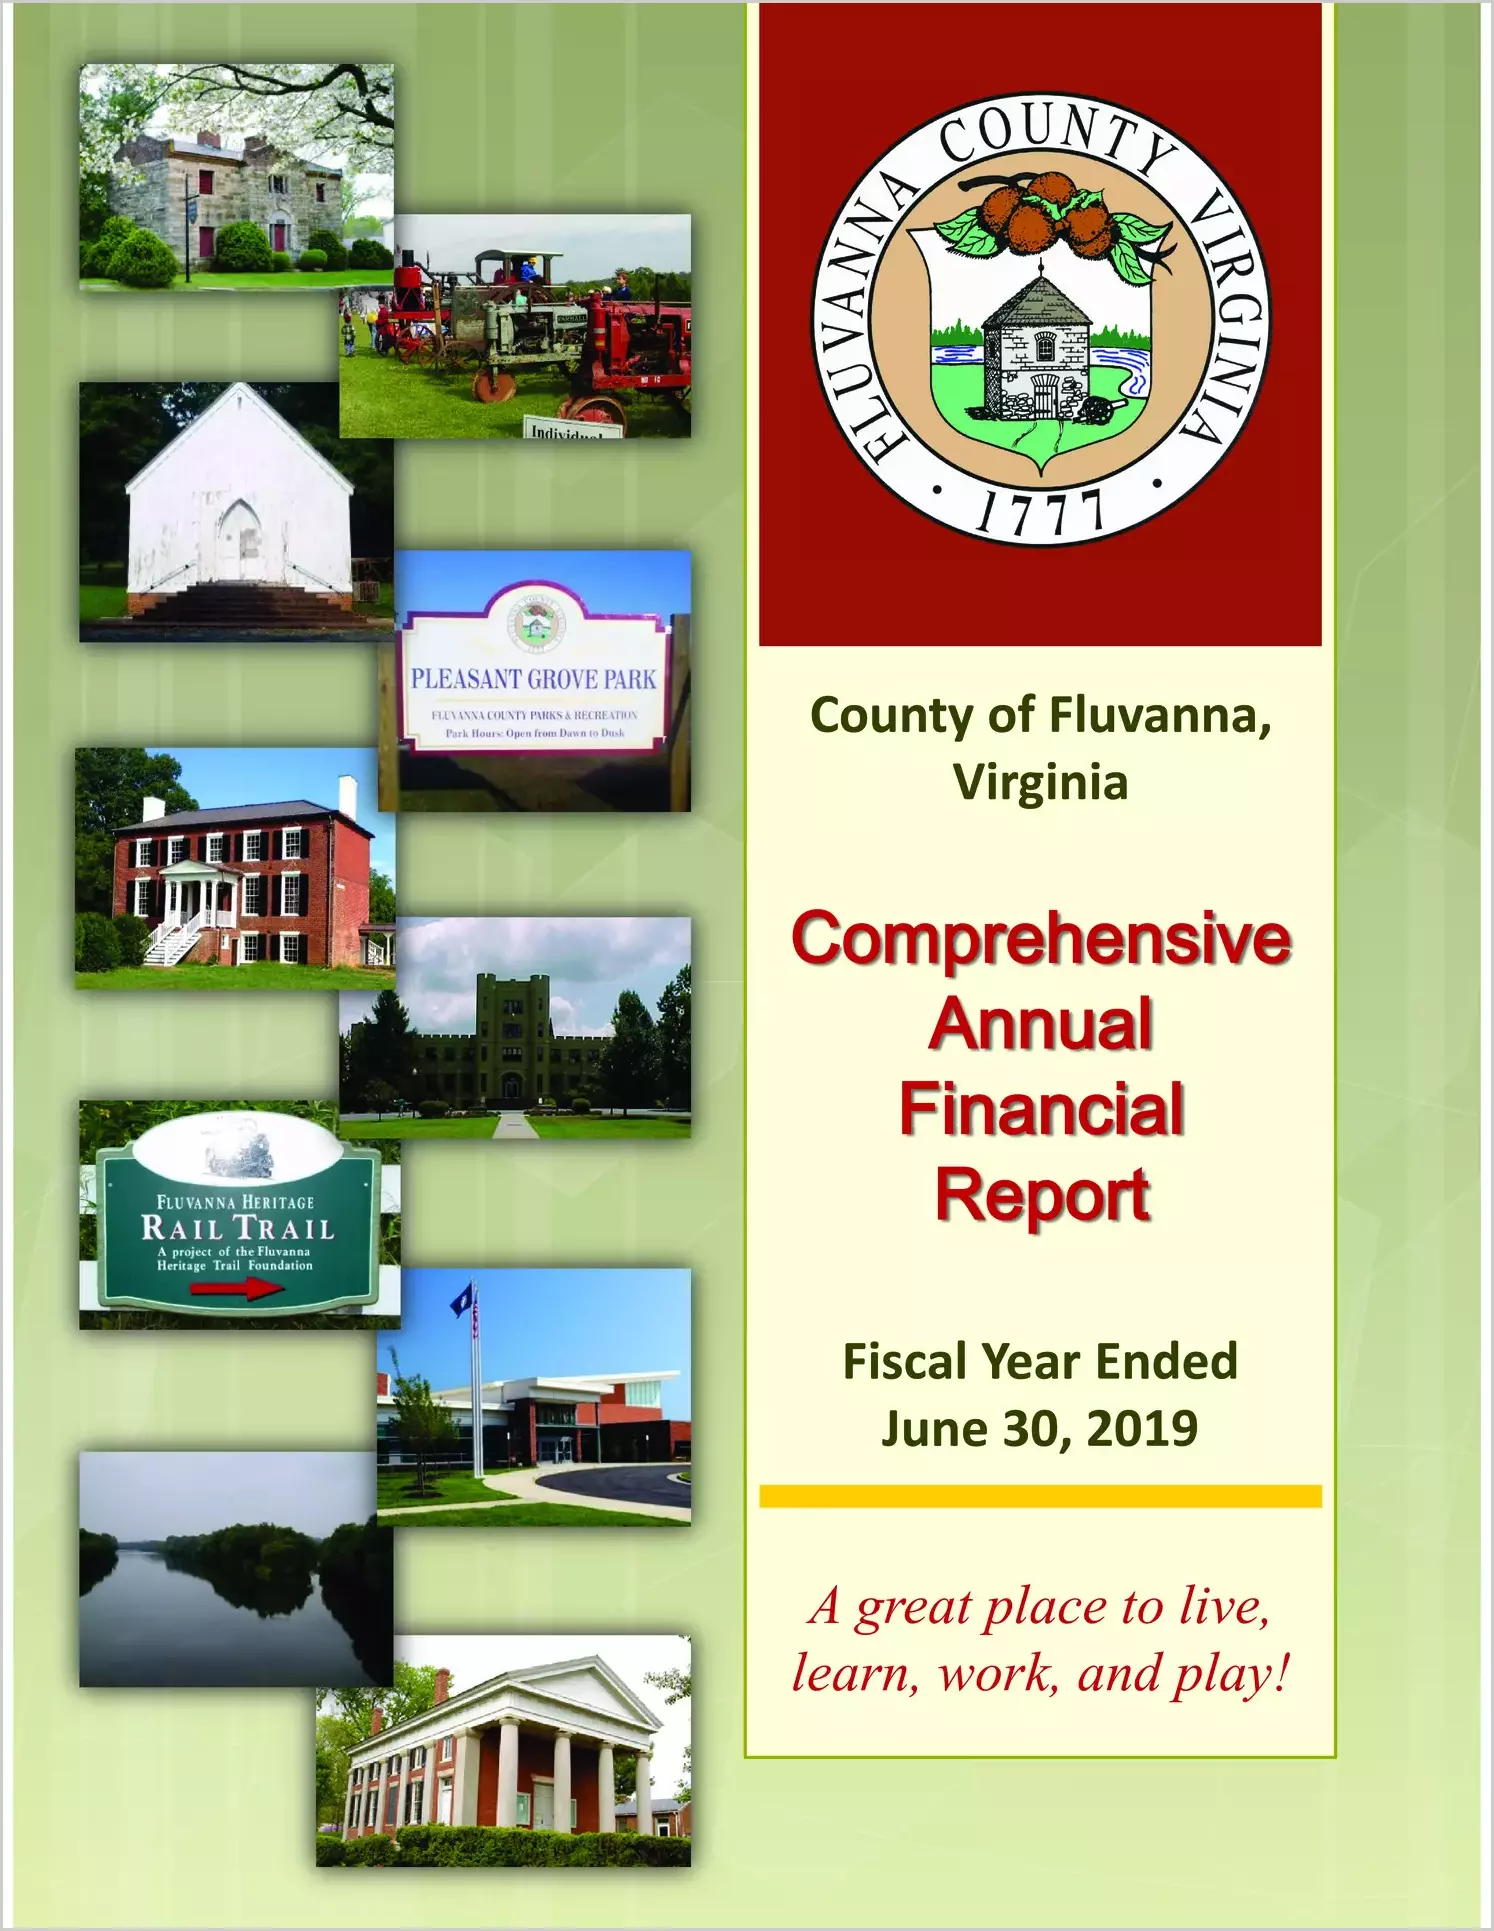 2019 Annual Financial Report for County of Fluvanna